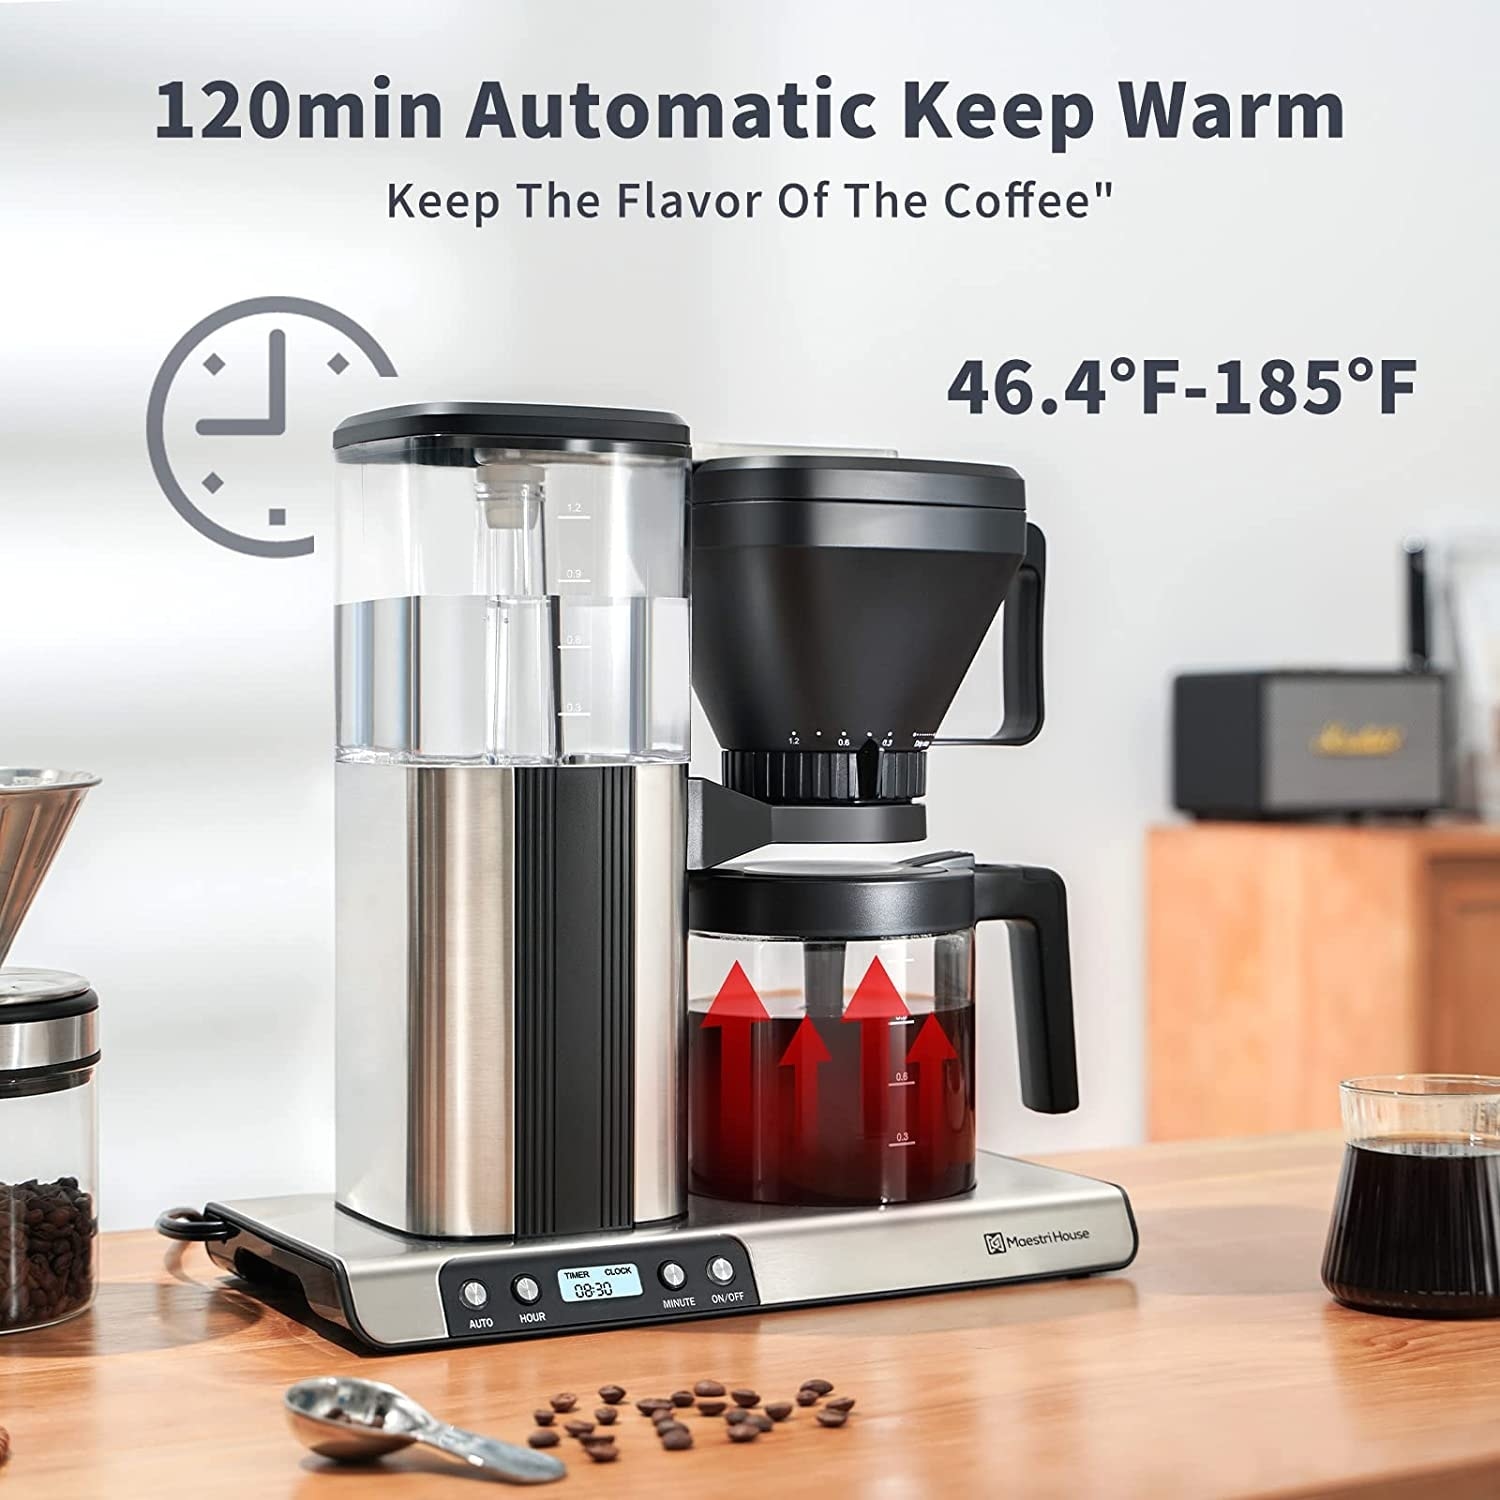 https://ak1.ostkcdn.com/images/products/is/images/direct/9522cb0e1d72c8fd32b9e3e22fee2ce4e397bb63/House-Coffee-Maker%2C-8-Cup-Drip-Coffee-Machine-with-Stainless-Steel%2C-One-Touch-Brewing-and-Adjustable-Strength.jpg